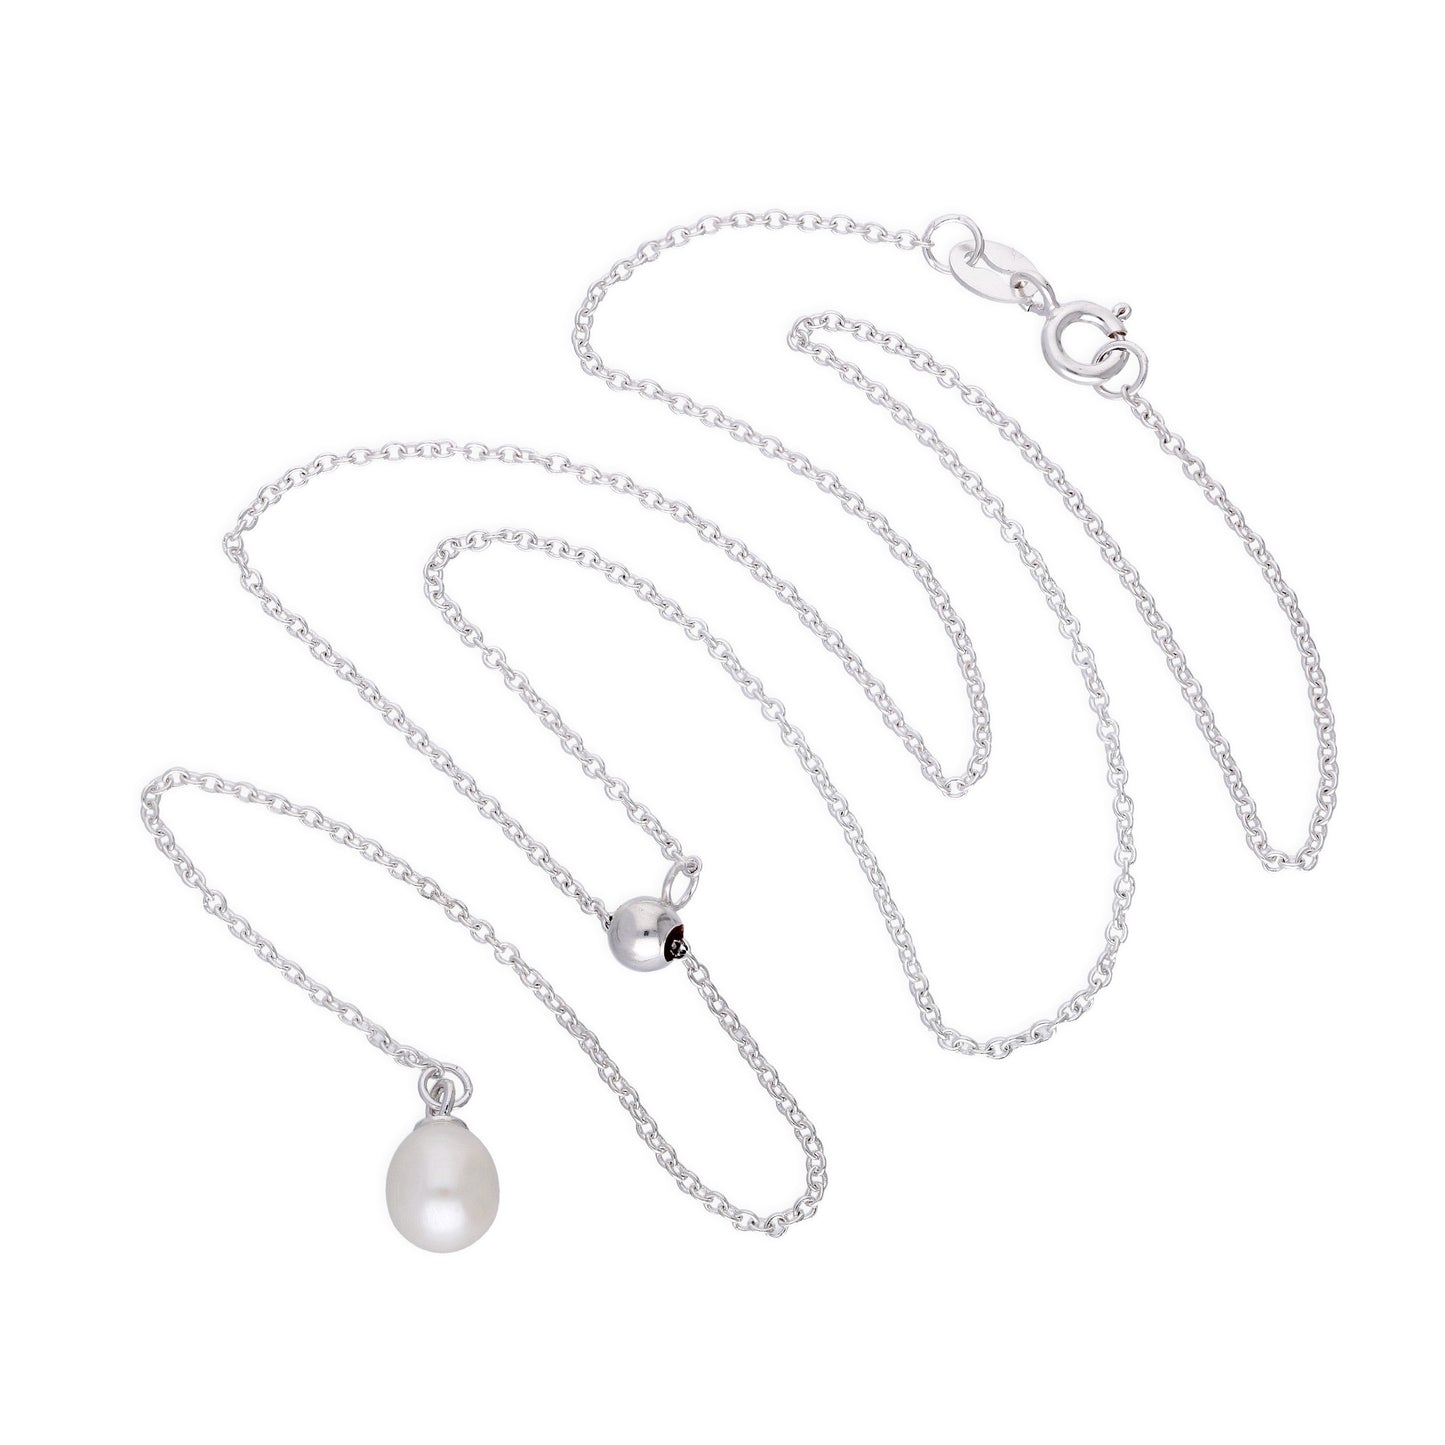 Sterling Silver Adjustable Single Pearl Drop Necklace Up to 18 Inches